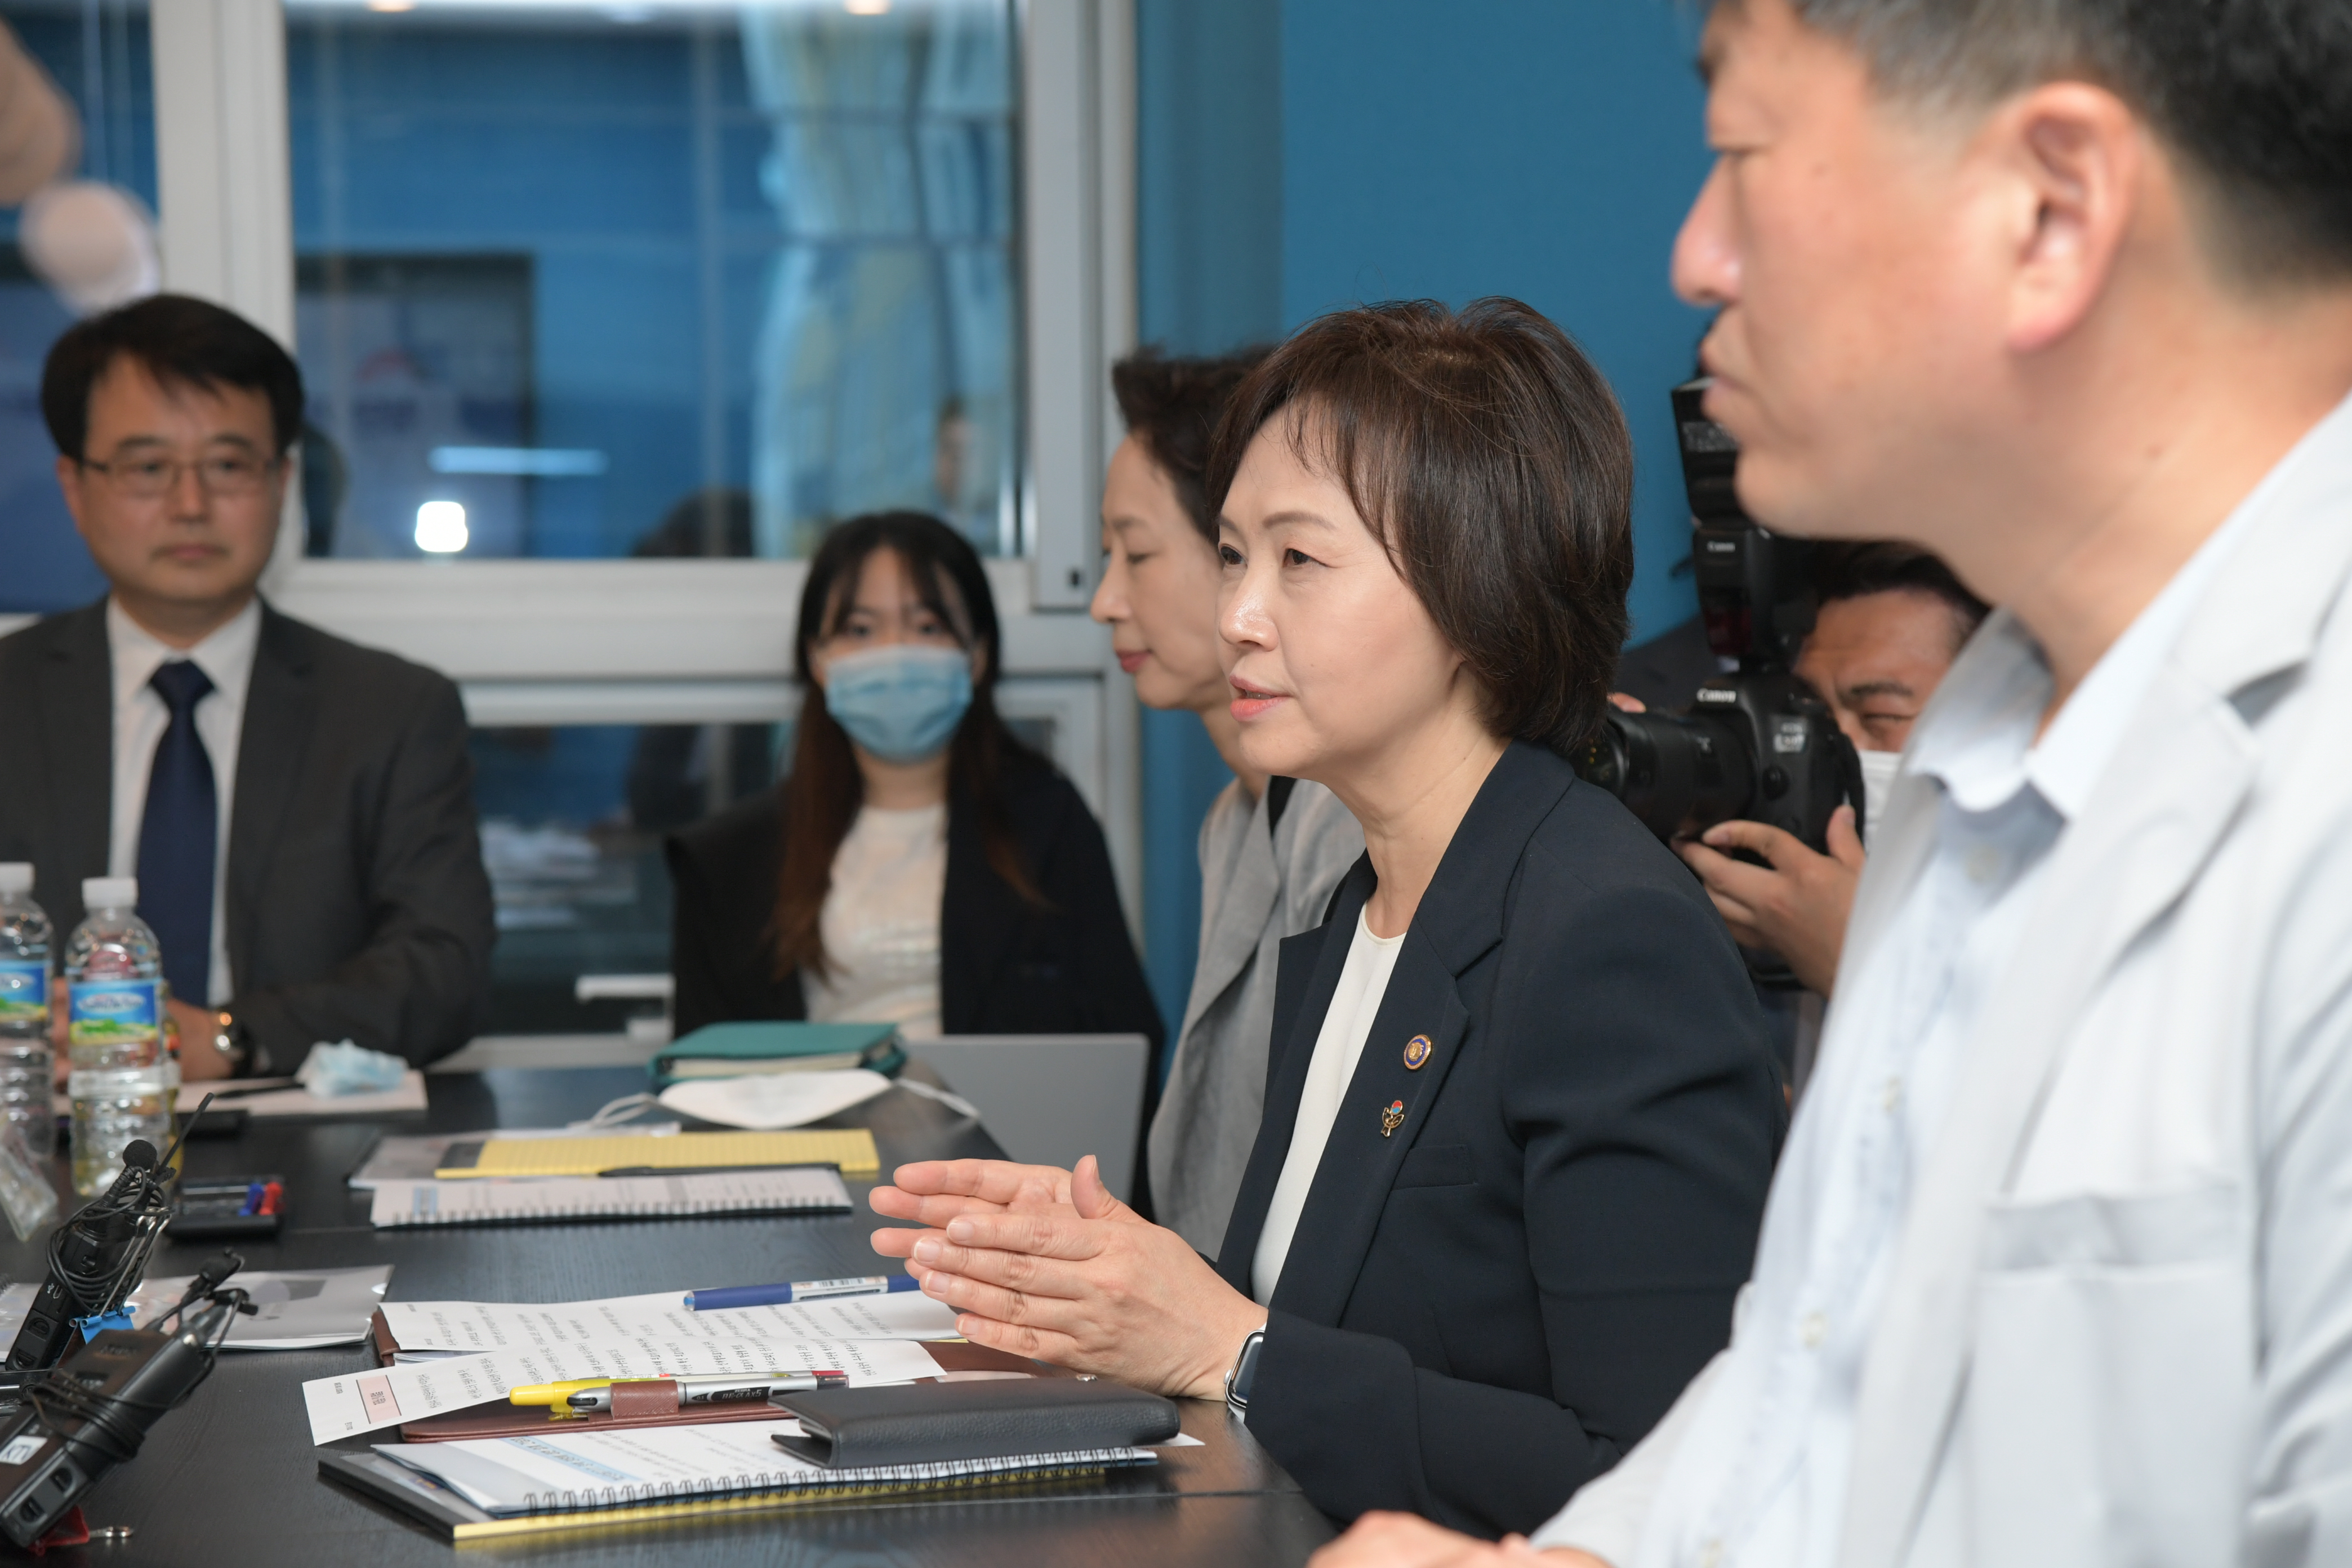 Photo News5 - [Jun. 15, 2020] Minister of Food and Drug Safety visits AI medical devicies company and attends CEO Meeting